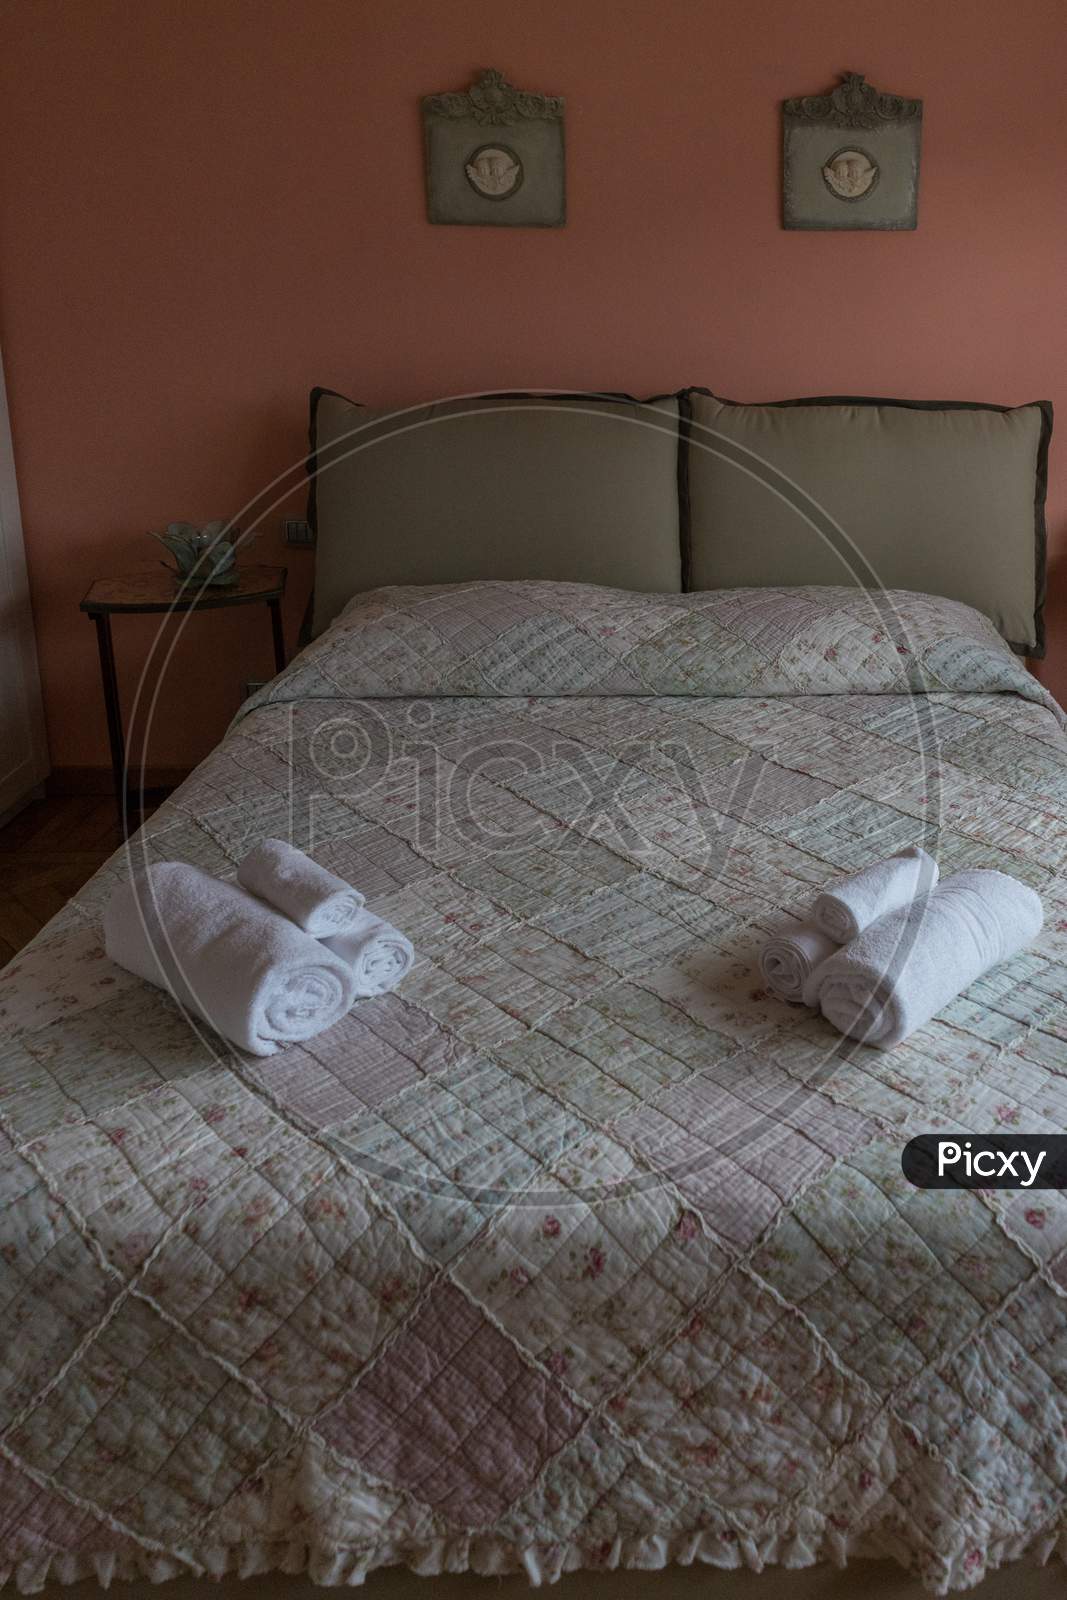 Varenna, Italy- March 31, 2018: Bed At Villa Varenna, One Of The Famous Air Bnb Places At Varenna, Italy That Has Been In Place Since 1895